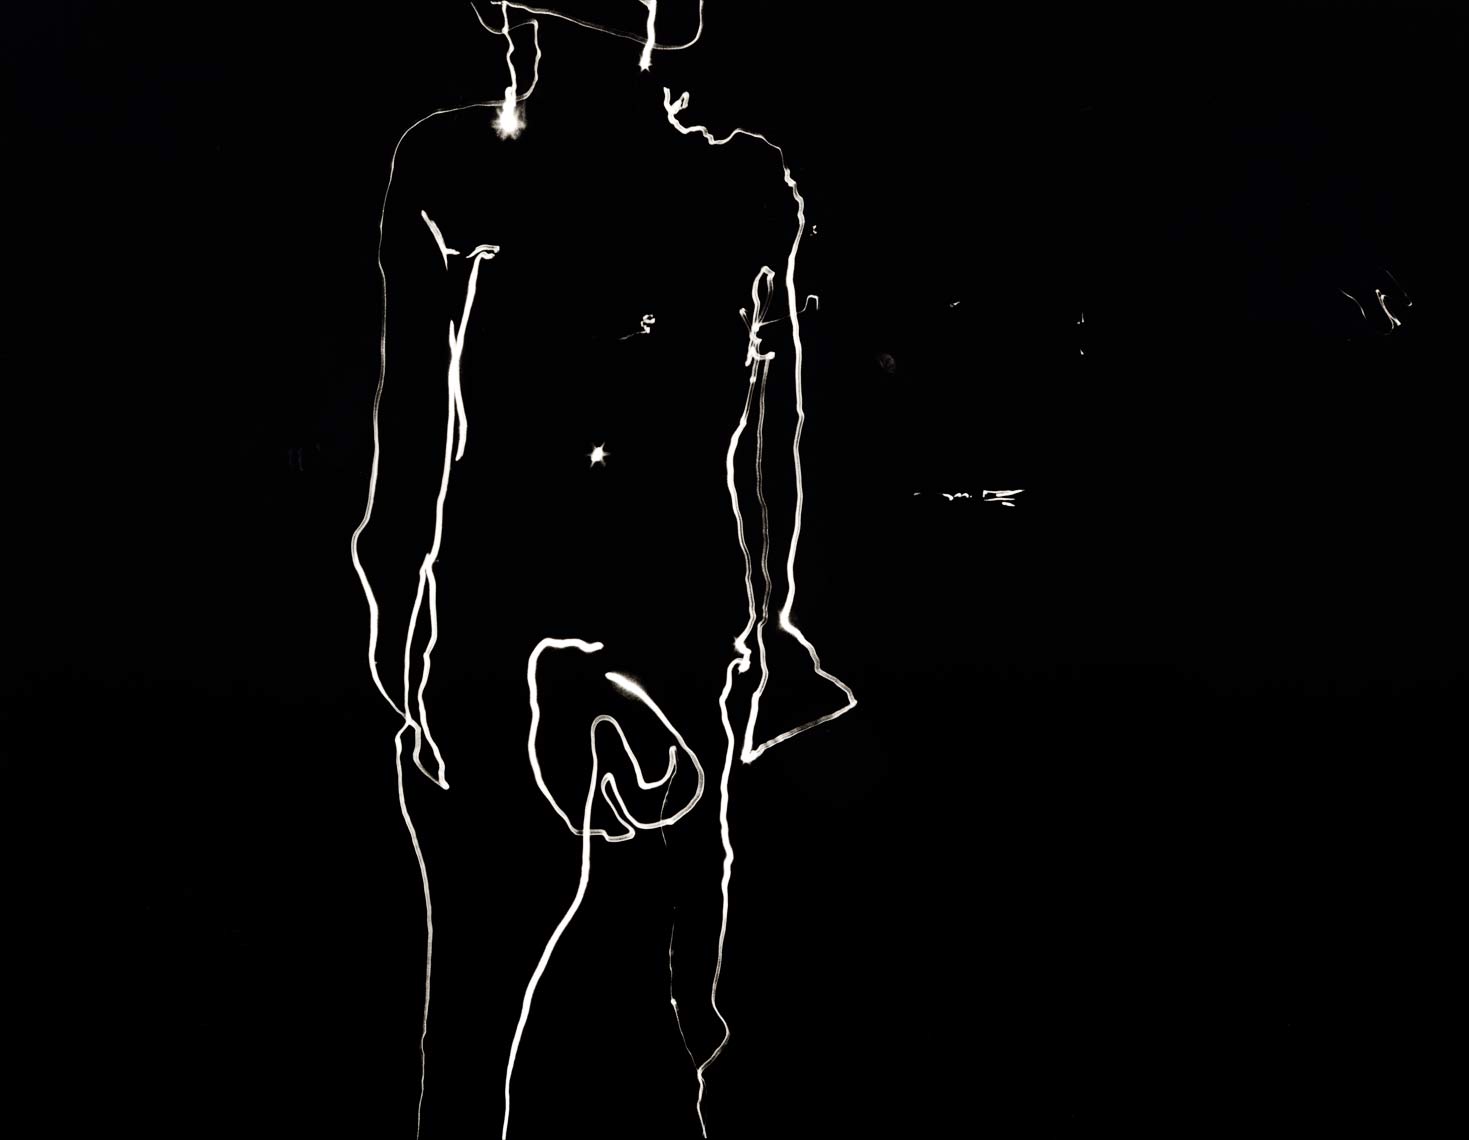 David Lebe; Self Portrait 1, 1976, male nude, light drawing, black and white photograph